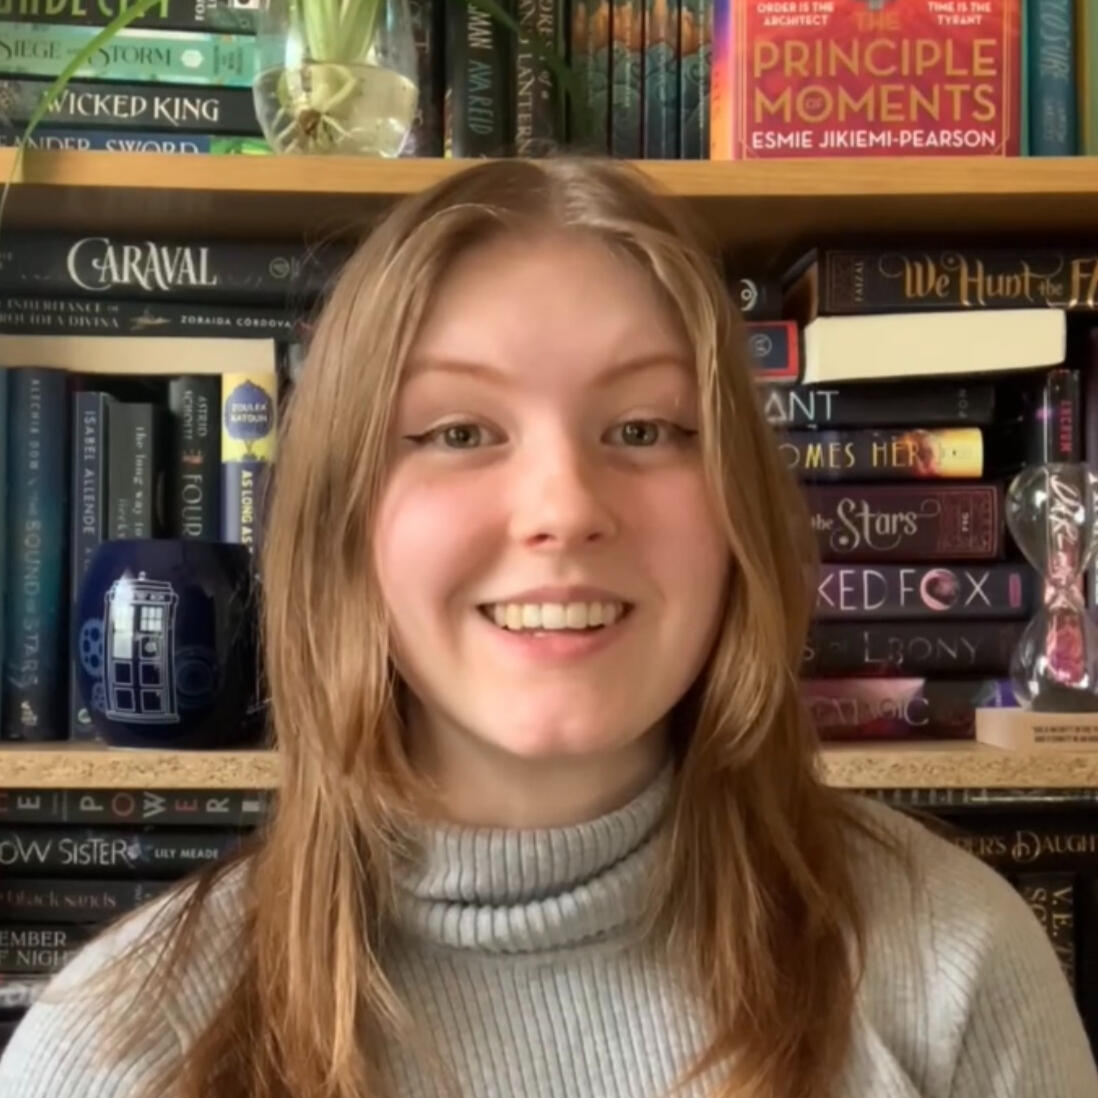 Ellie, a white woman with long reddish-blond hair wearing a gray turtleneck sweater, smiles in front of a colorful bookshelf.